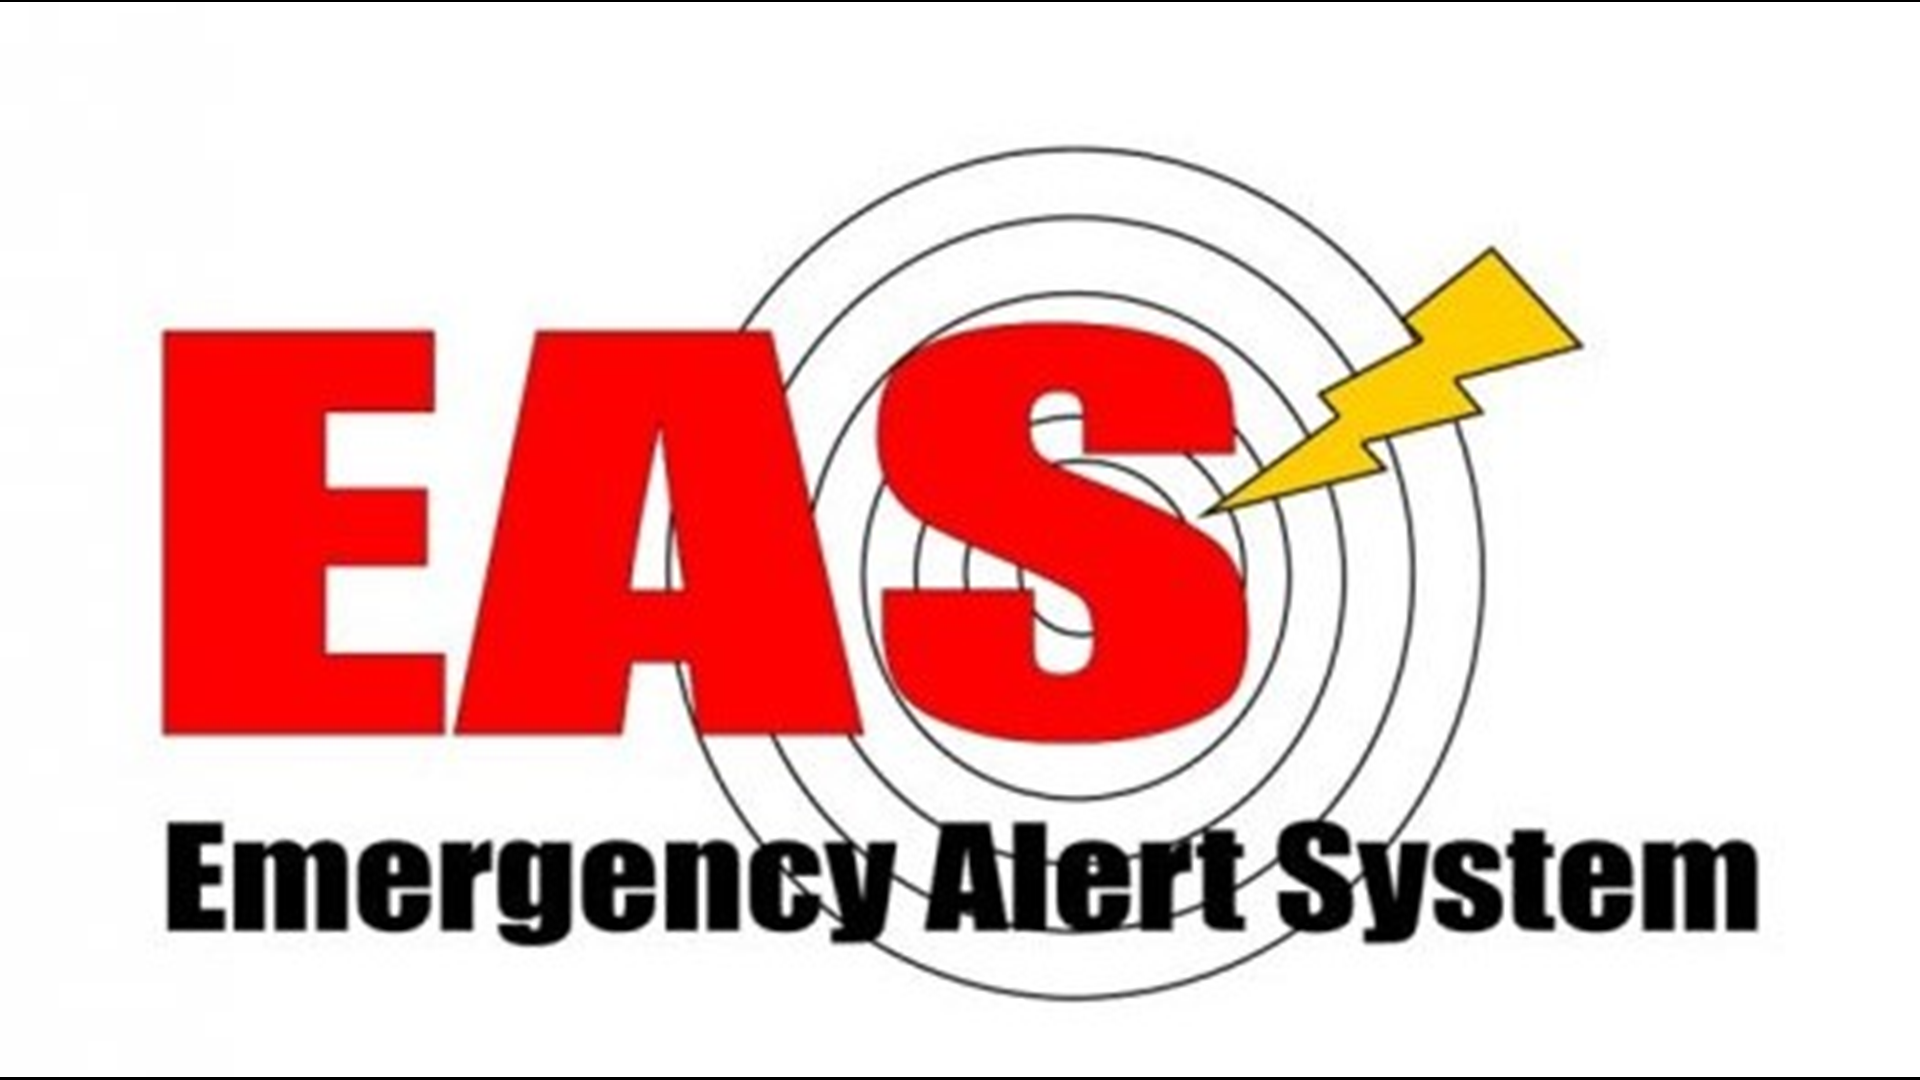 A nationwide test of the Emergency Alert System will take place Wednesday, August 7 at 2:20 p.m. The test will be about a minute long, and it will look and sound similar to the required monthly test message broadcast by EAS participants, which include radio, television, cable and direct broadcast satellite service providers.